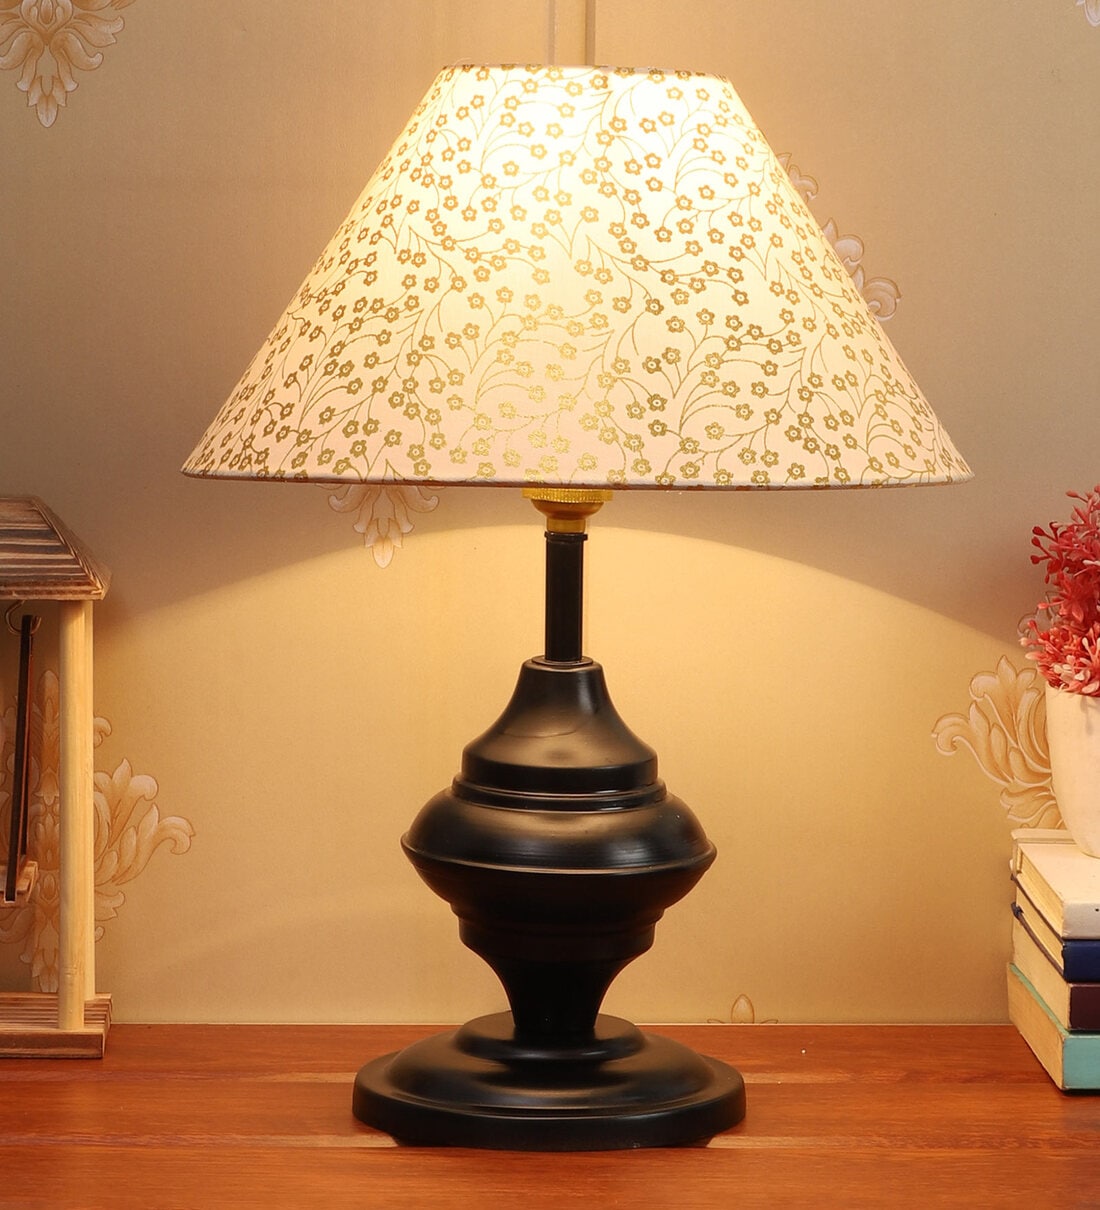 Marazzi Beige and Gold Fabric Shade Night Lamp With Metal Base, By Foziq